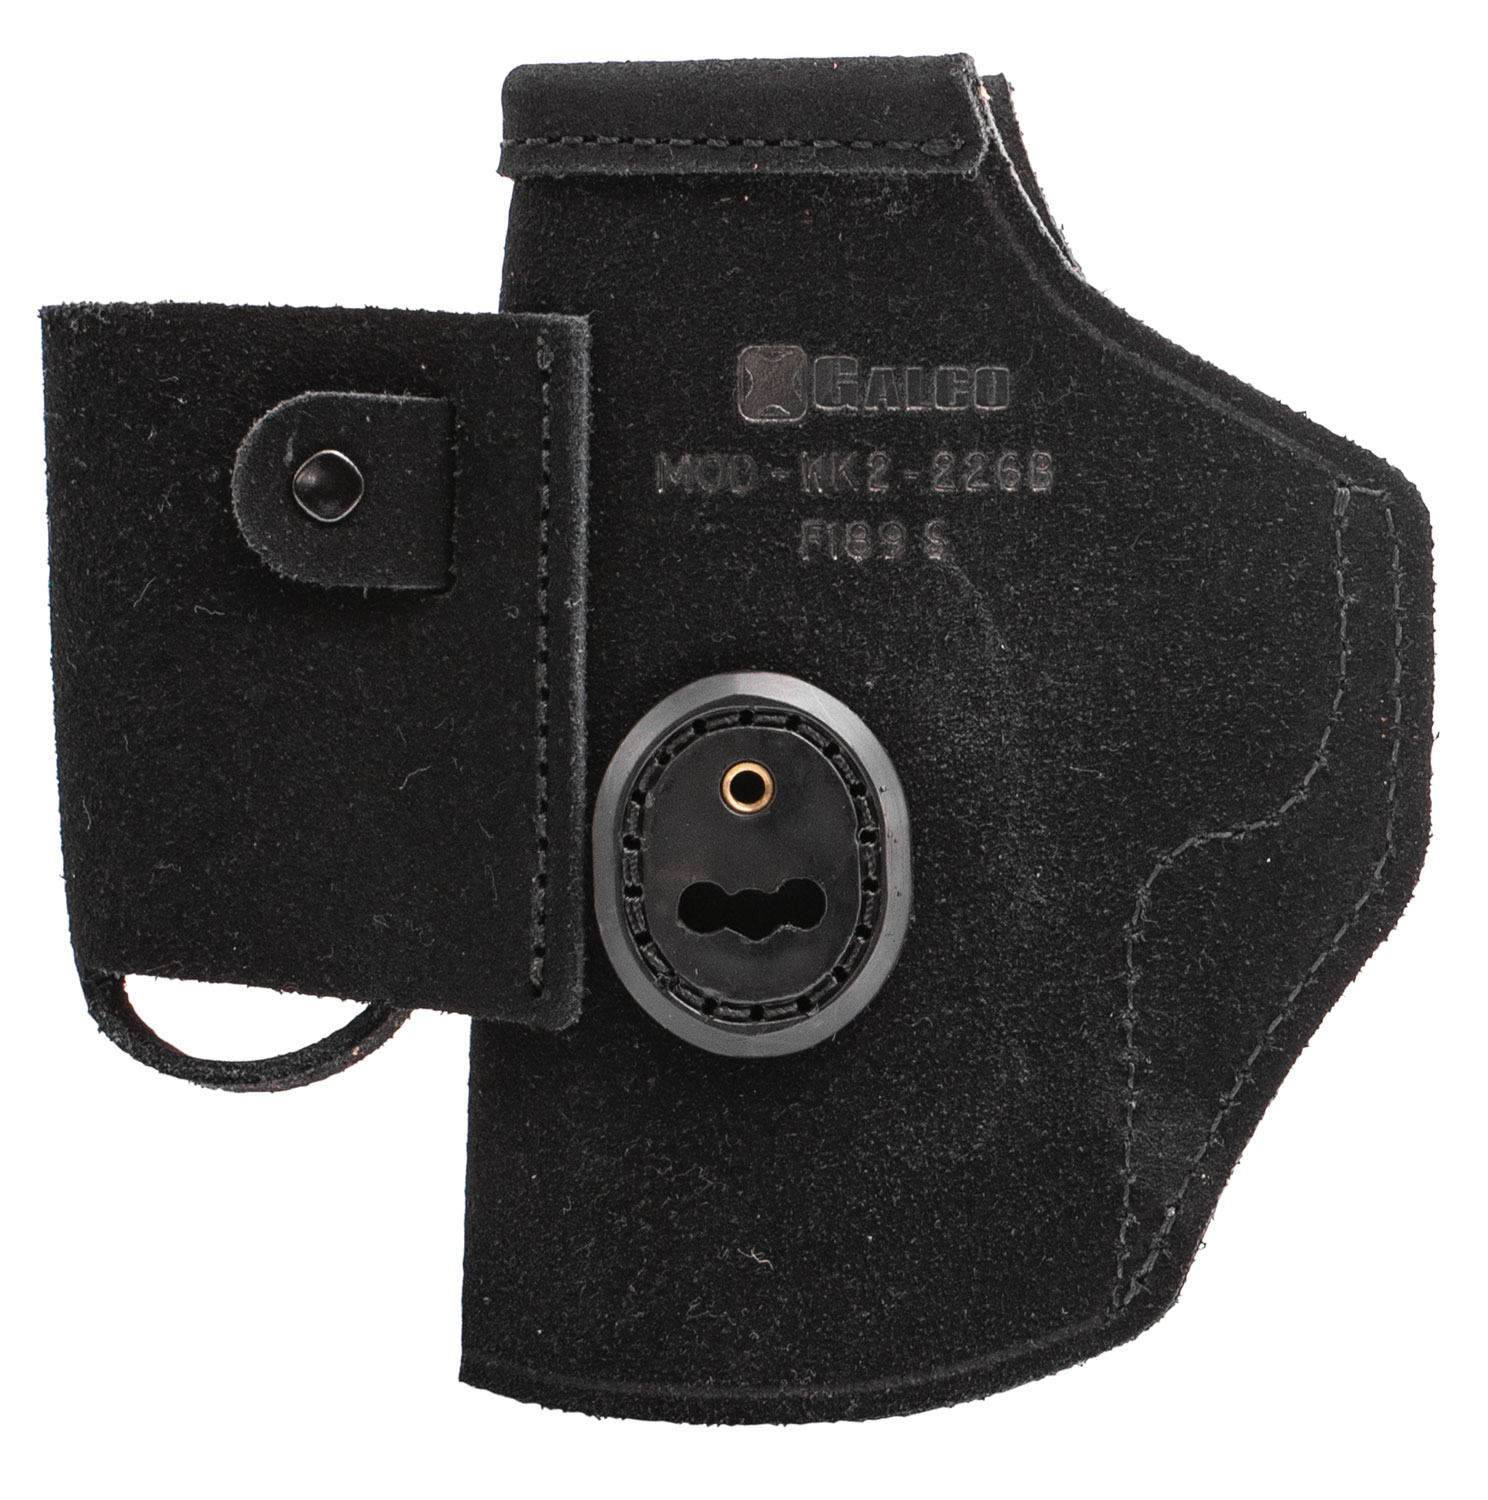 Galco WK2226B Walkabout 2.0  Black Leather IWB Fits Glock 19,23,32 Ambidextrous